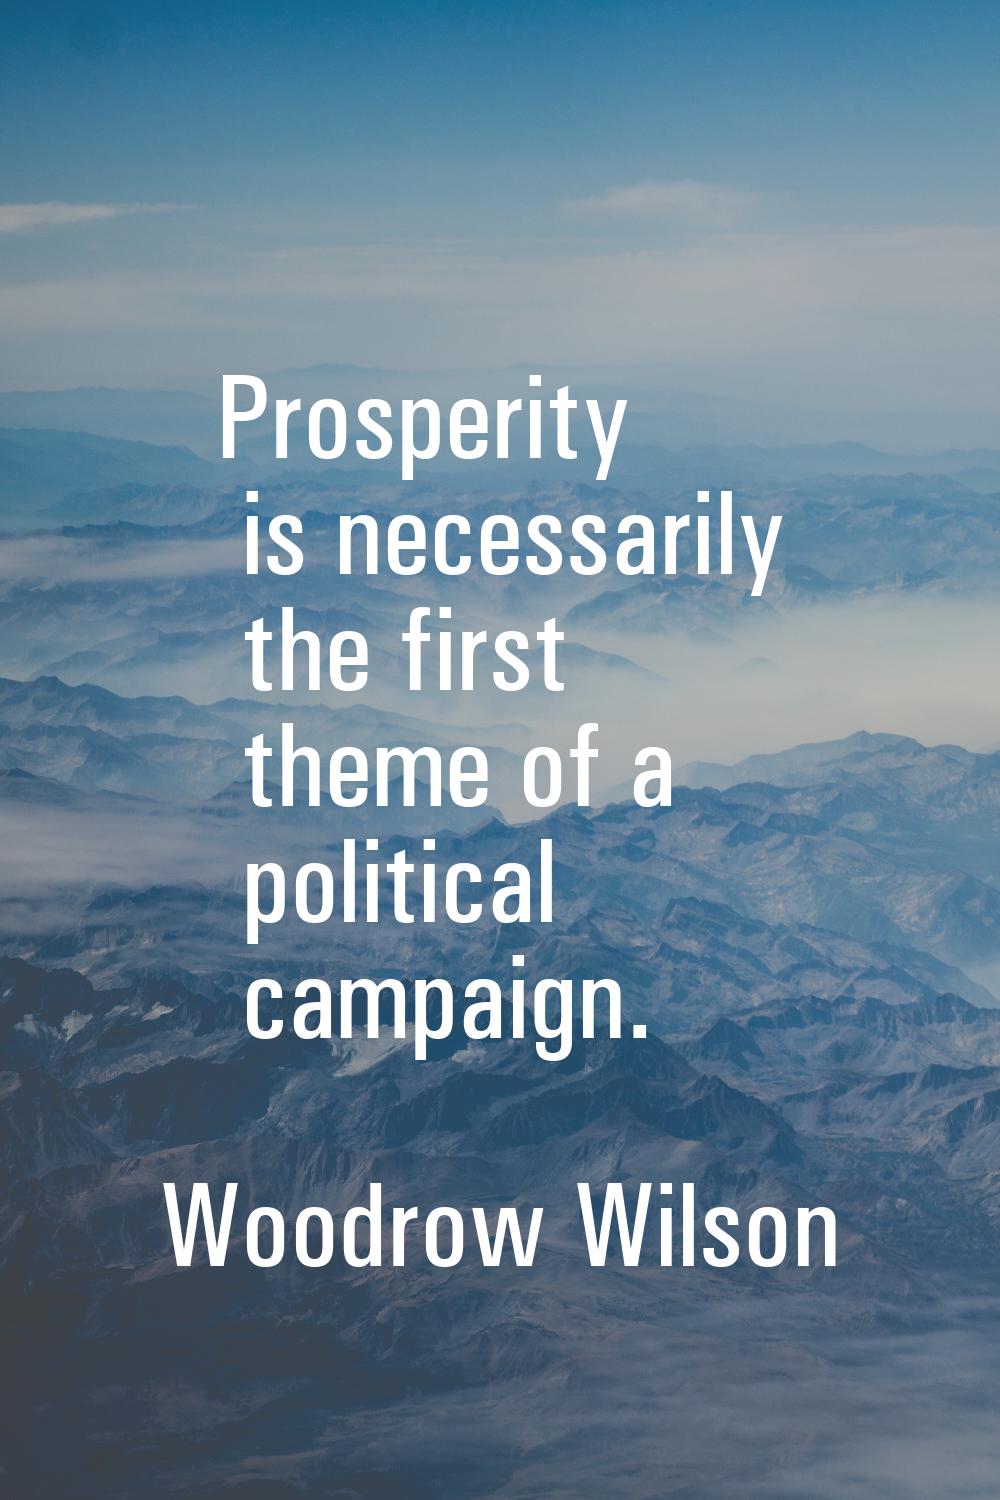 Prosperity is necessarily the first theme of a political campaign.